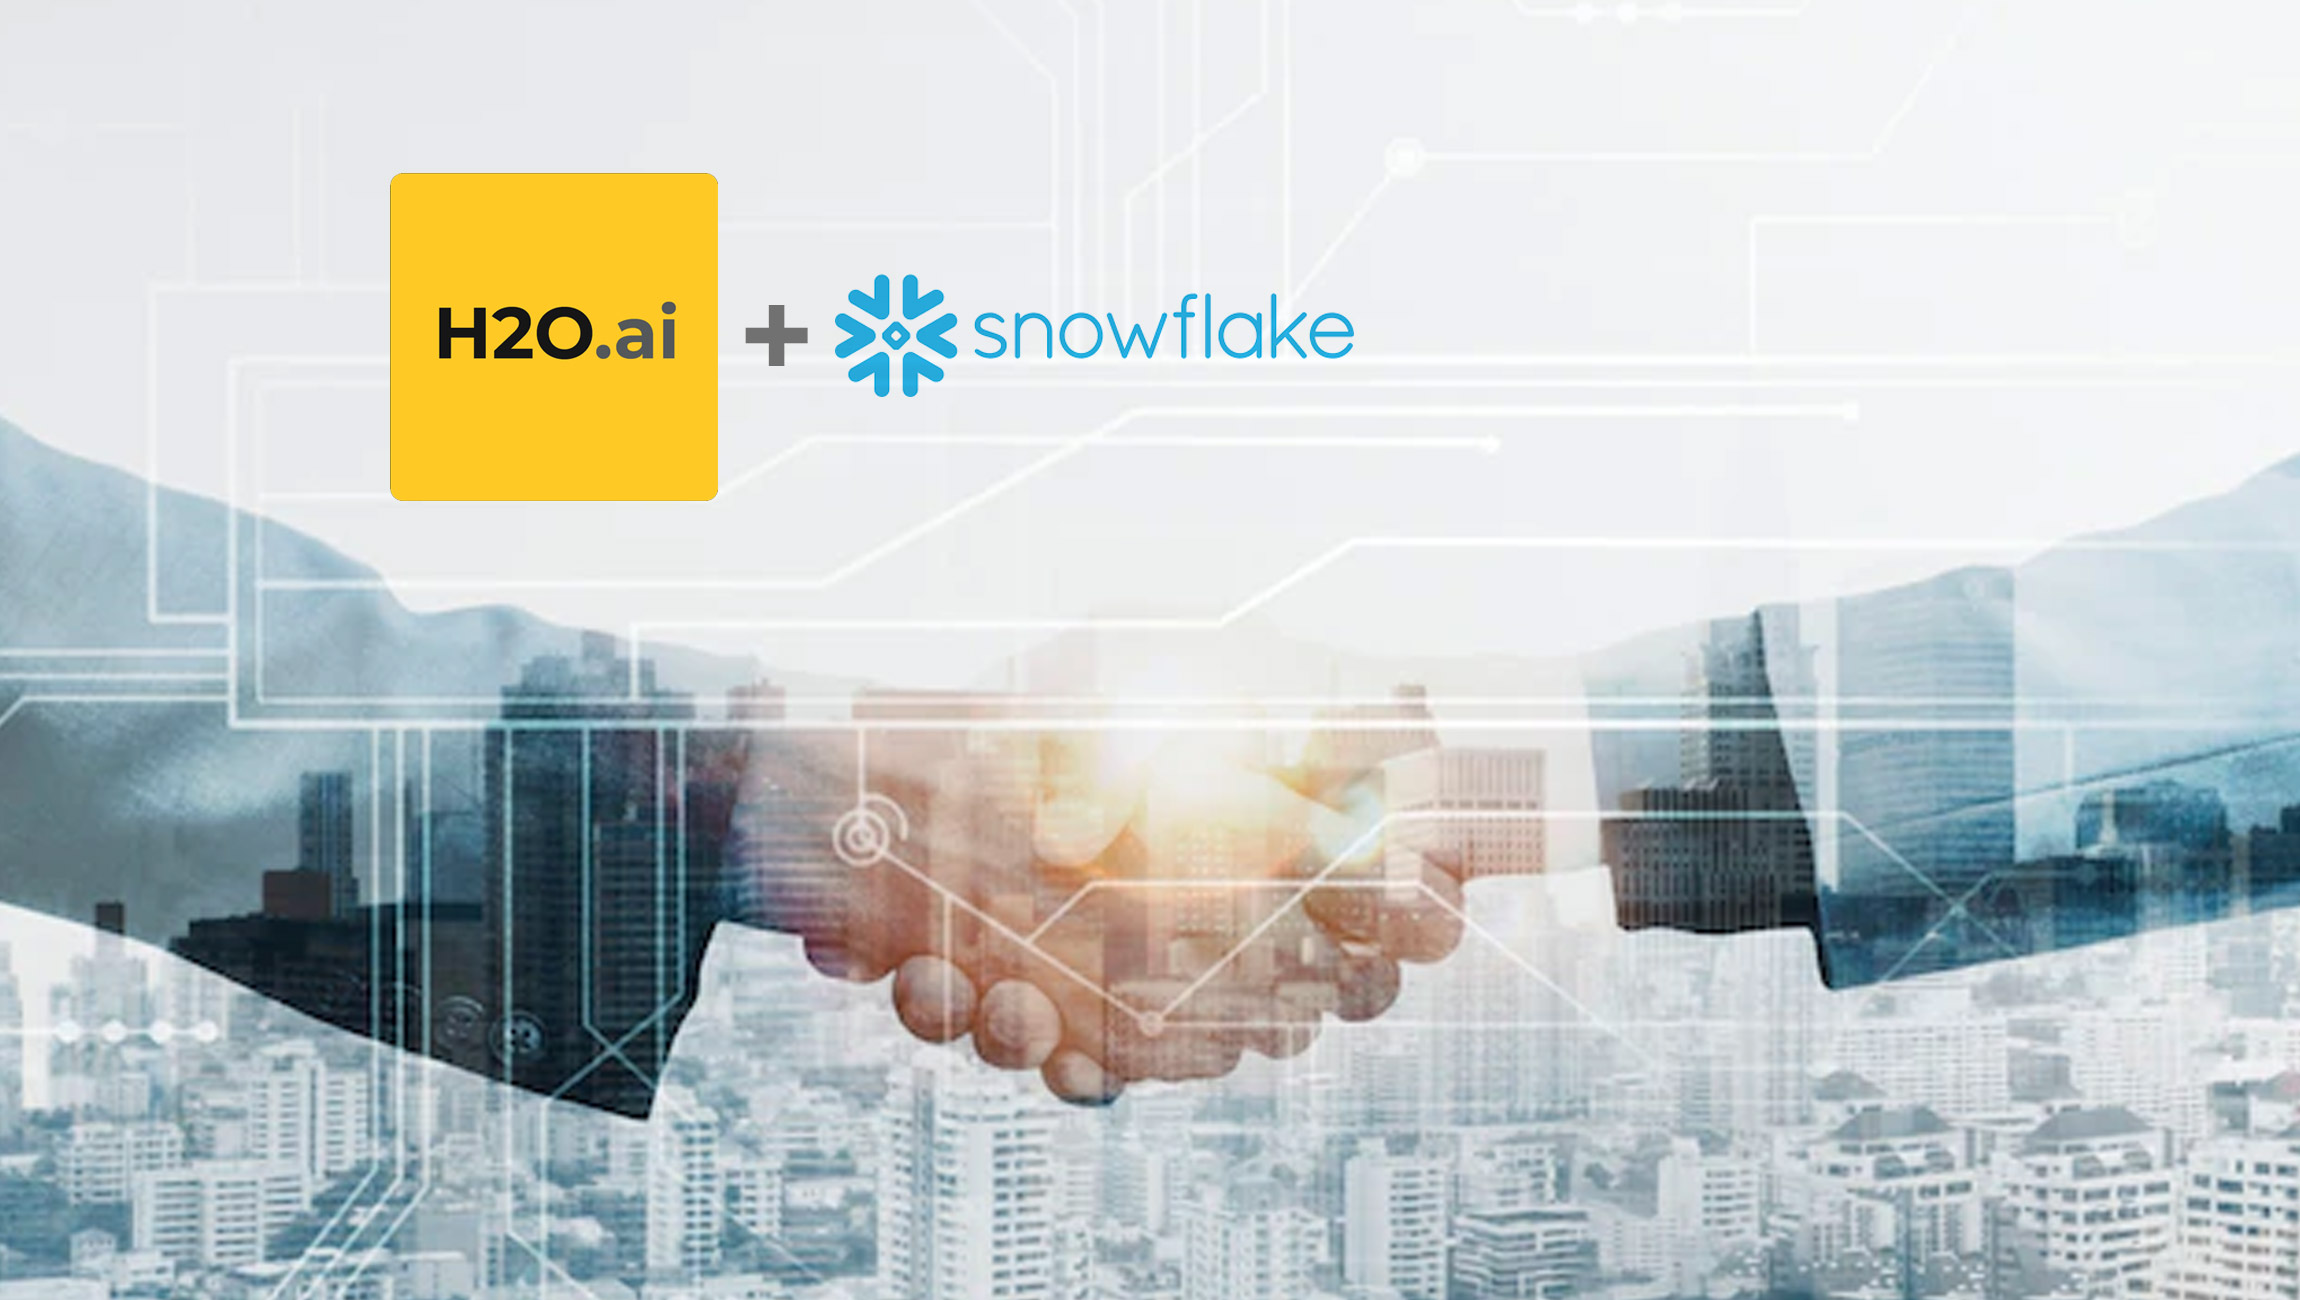 H2O.ai Expands Snowflake Partnership Enabling Successful AI Transformations for Customers